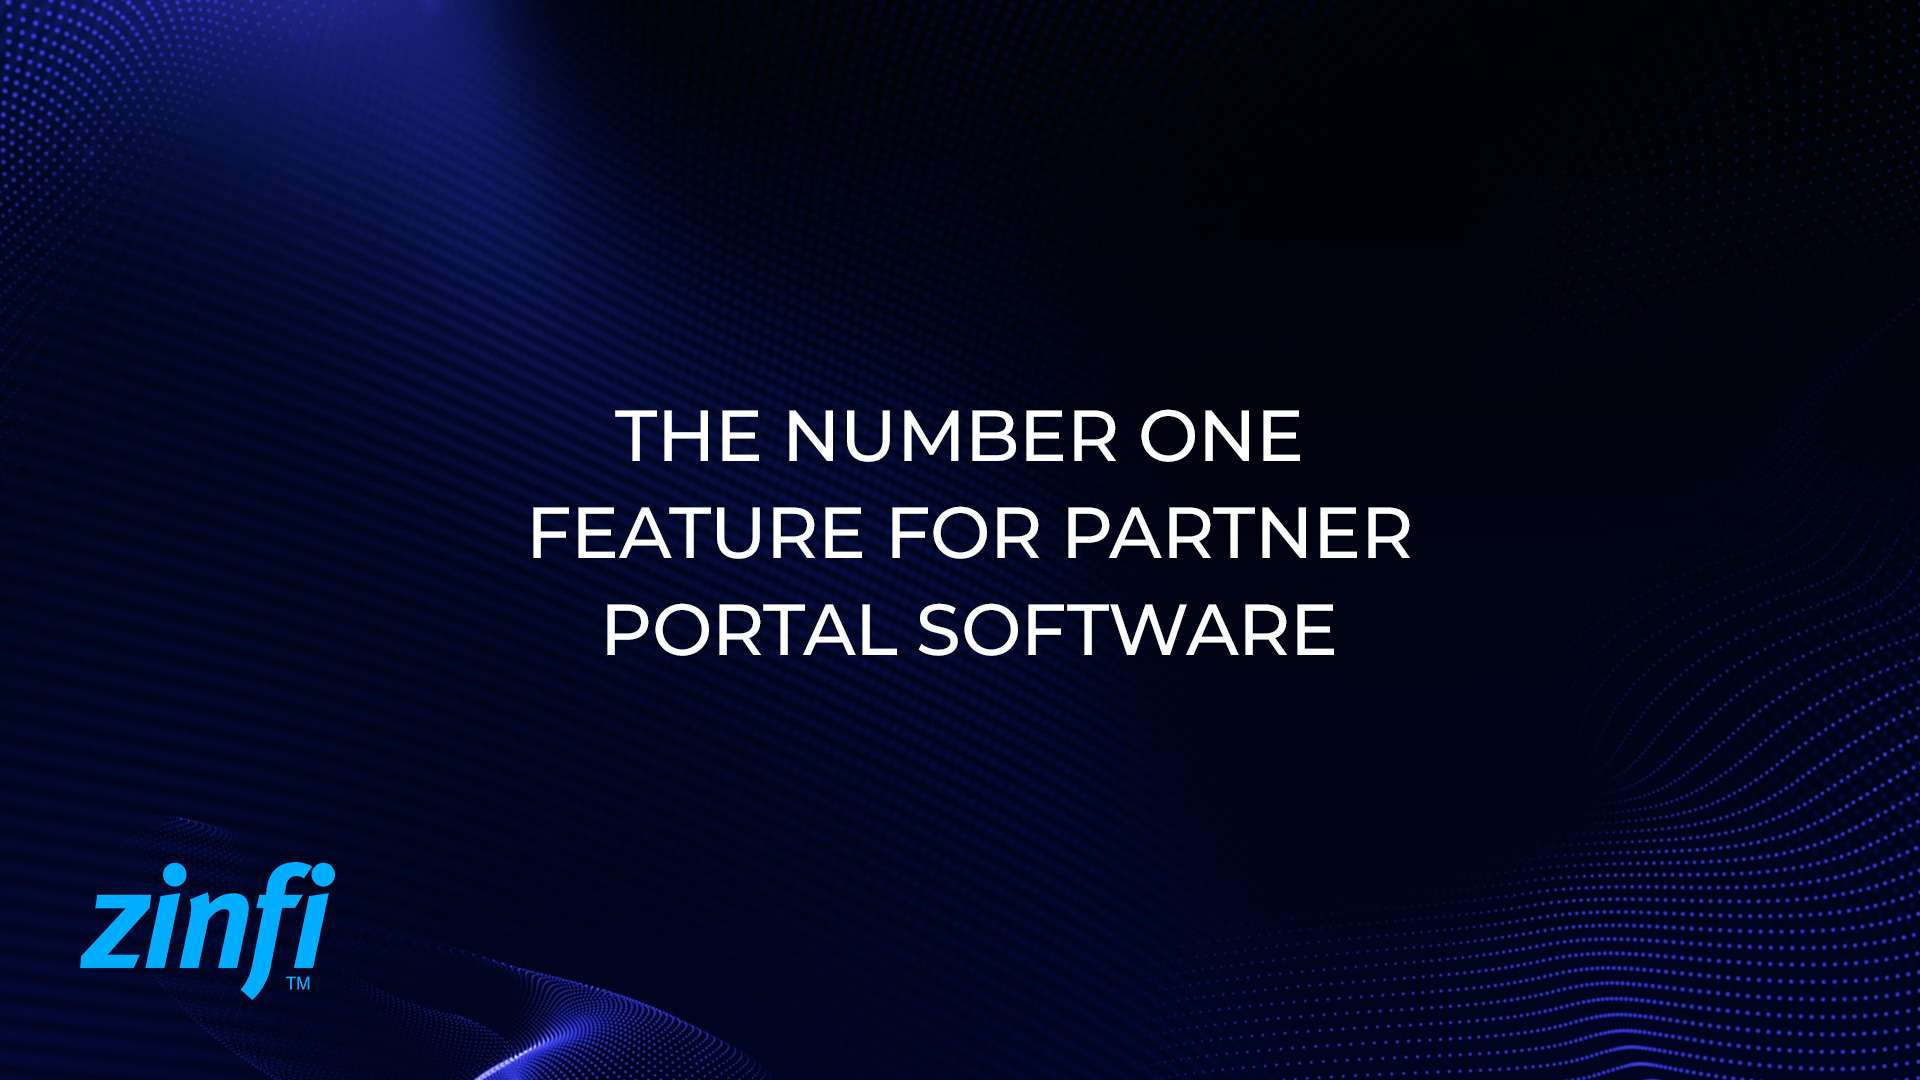 Feature for Partner Portal Software